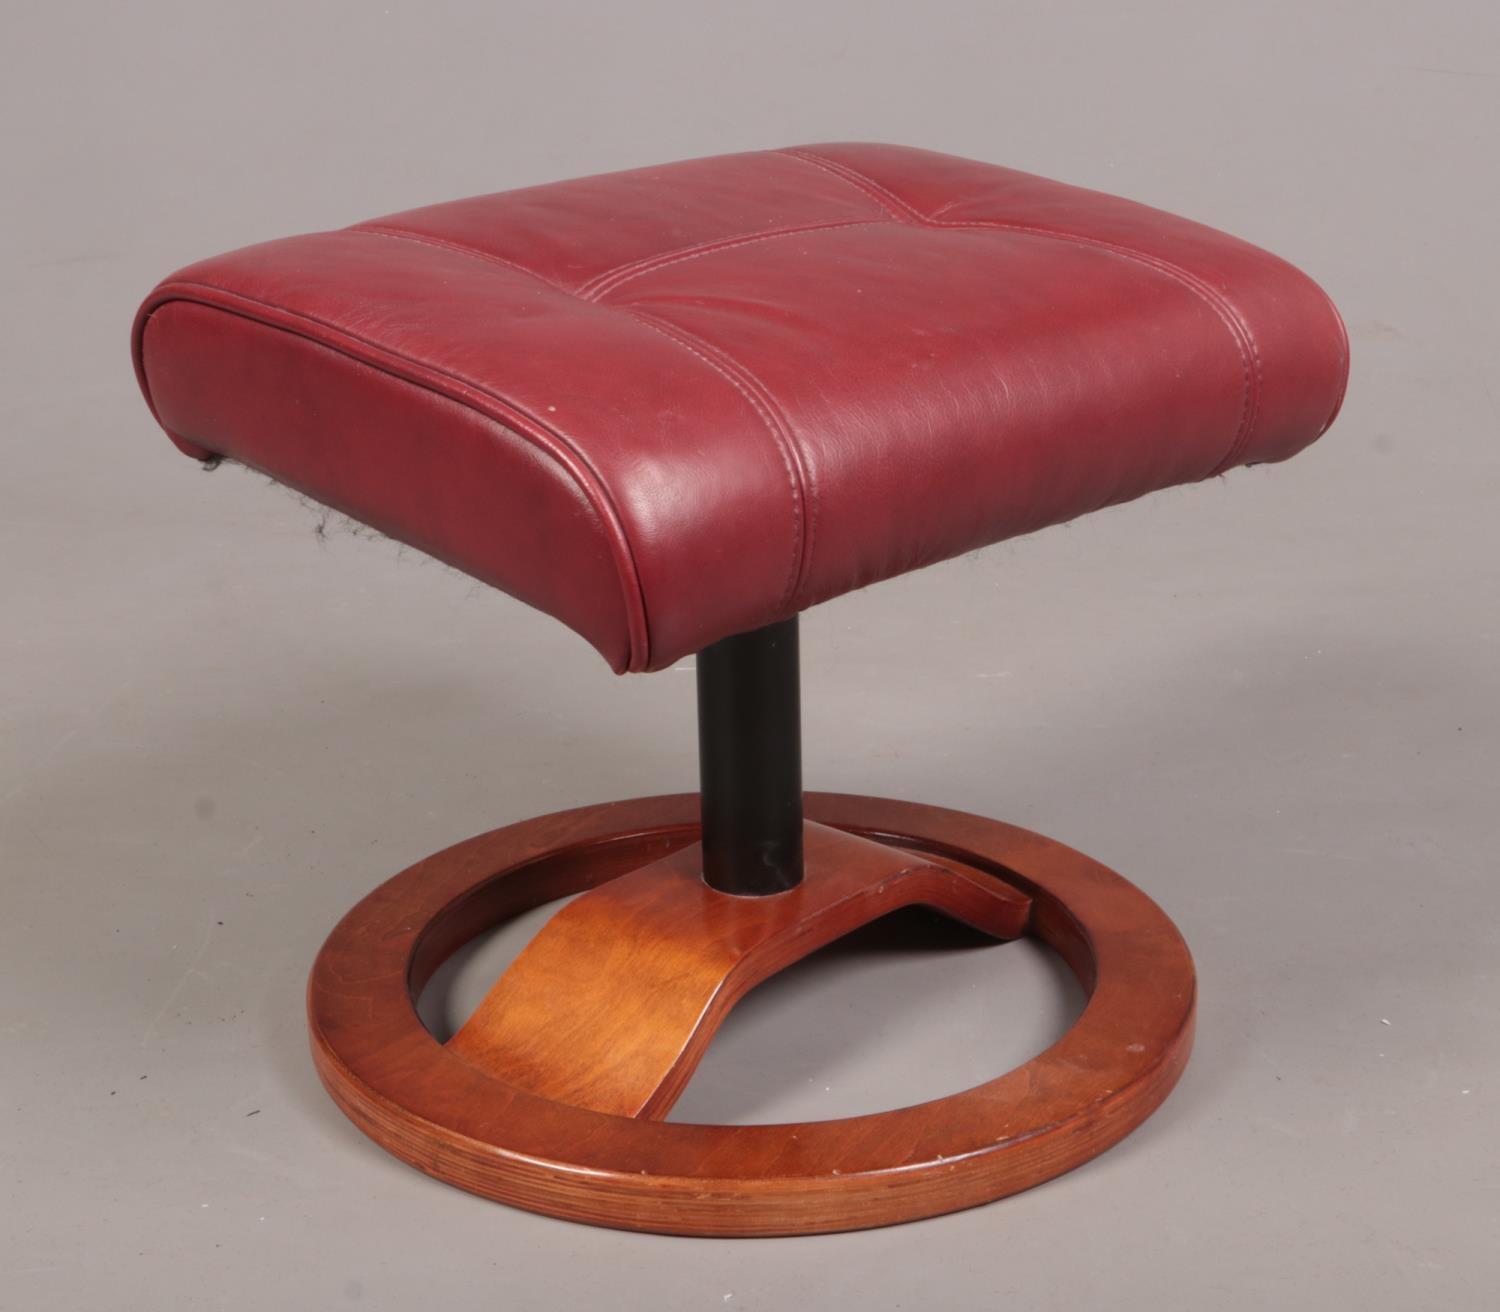 A red leather footstool with wooden base.